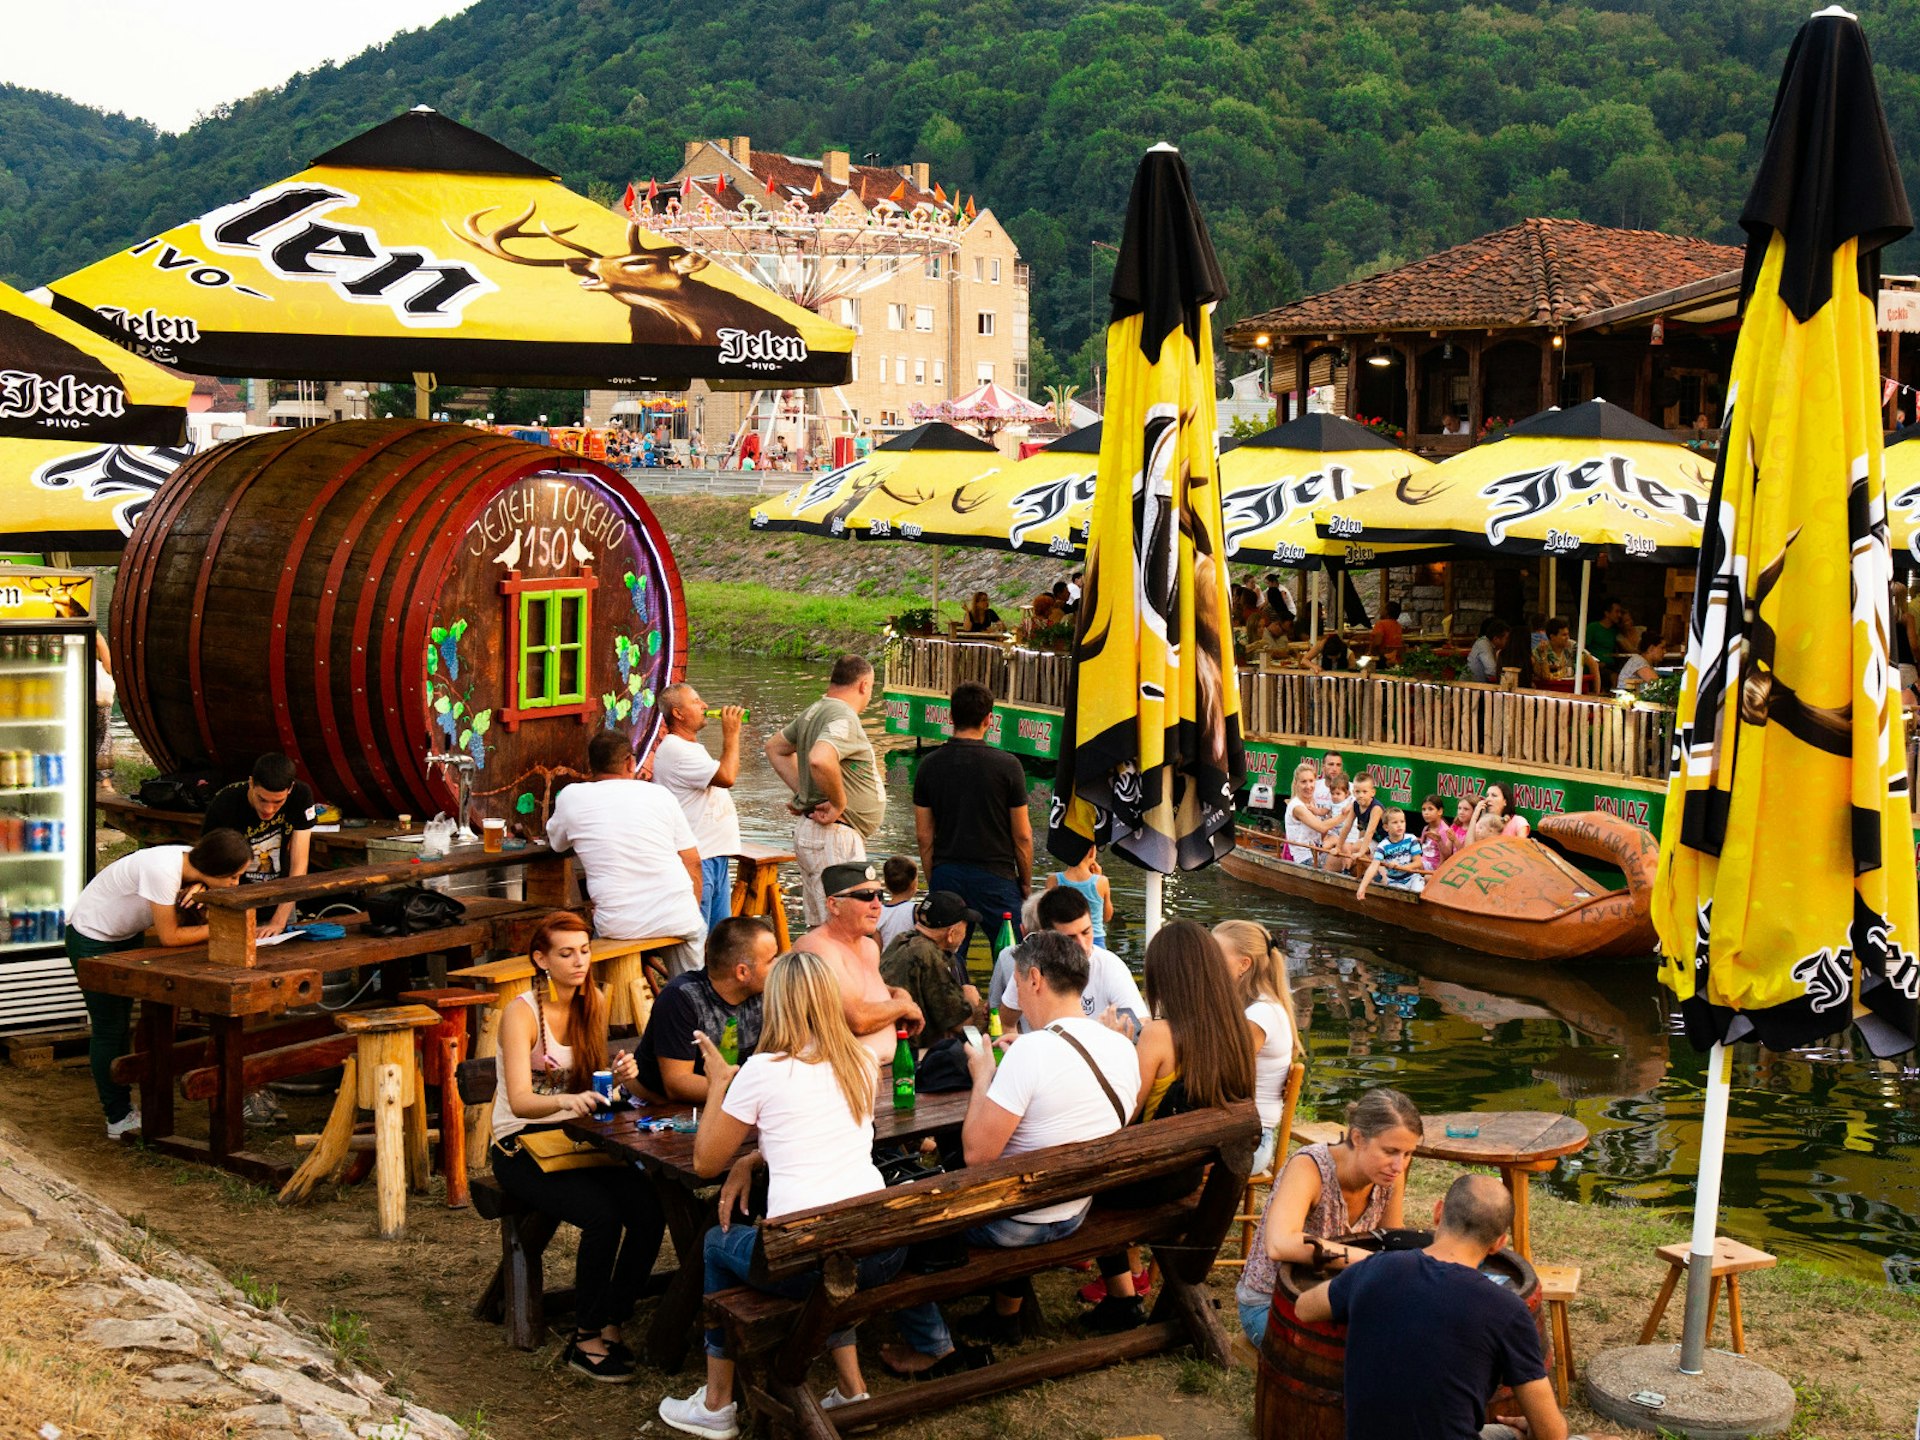 Outdoor riverside cafes packed with festival-goers in the village of Guča. Groups sit at picnic tables, under bright yellow umbrellas with rolling hills and forests in the background. A river runs between two cafes and festival goers are floating down it in a boat made to look like a huge clog © Aleksandar Donev / Lonely Planet